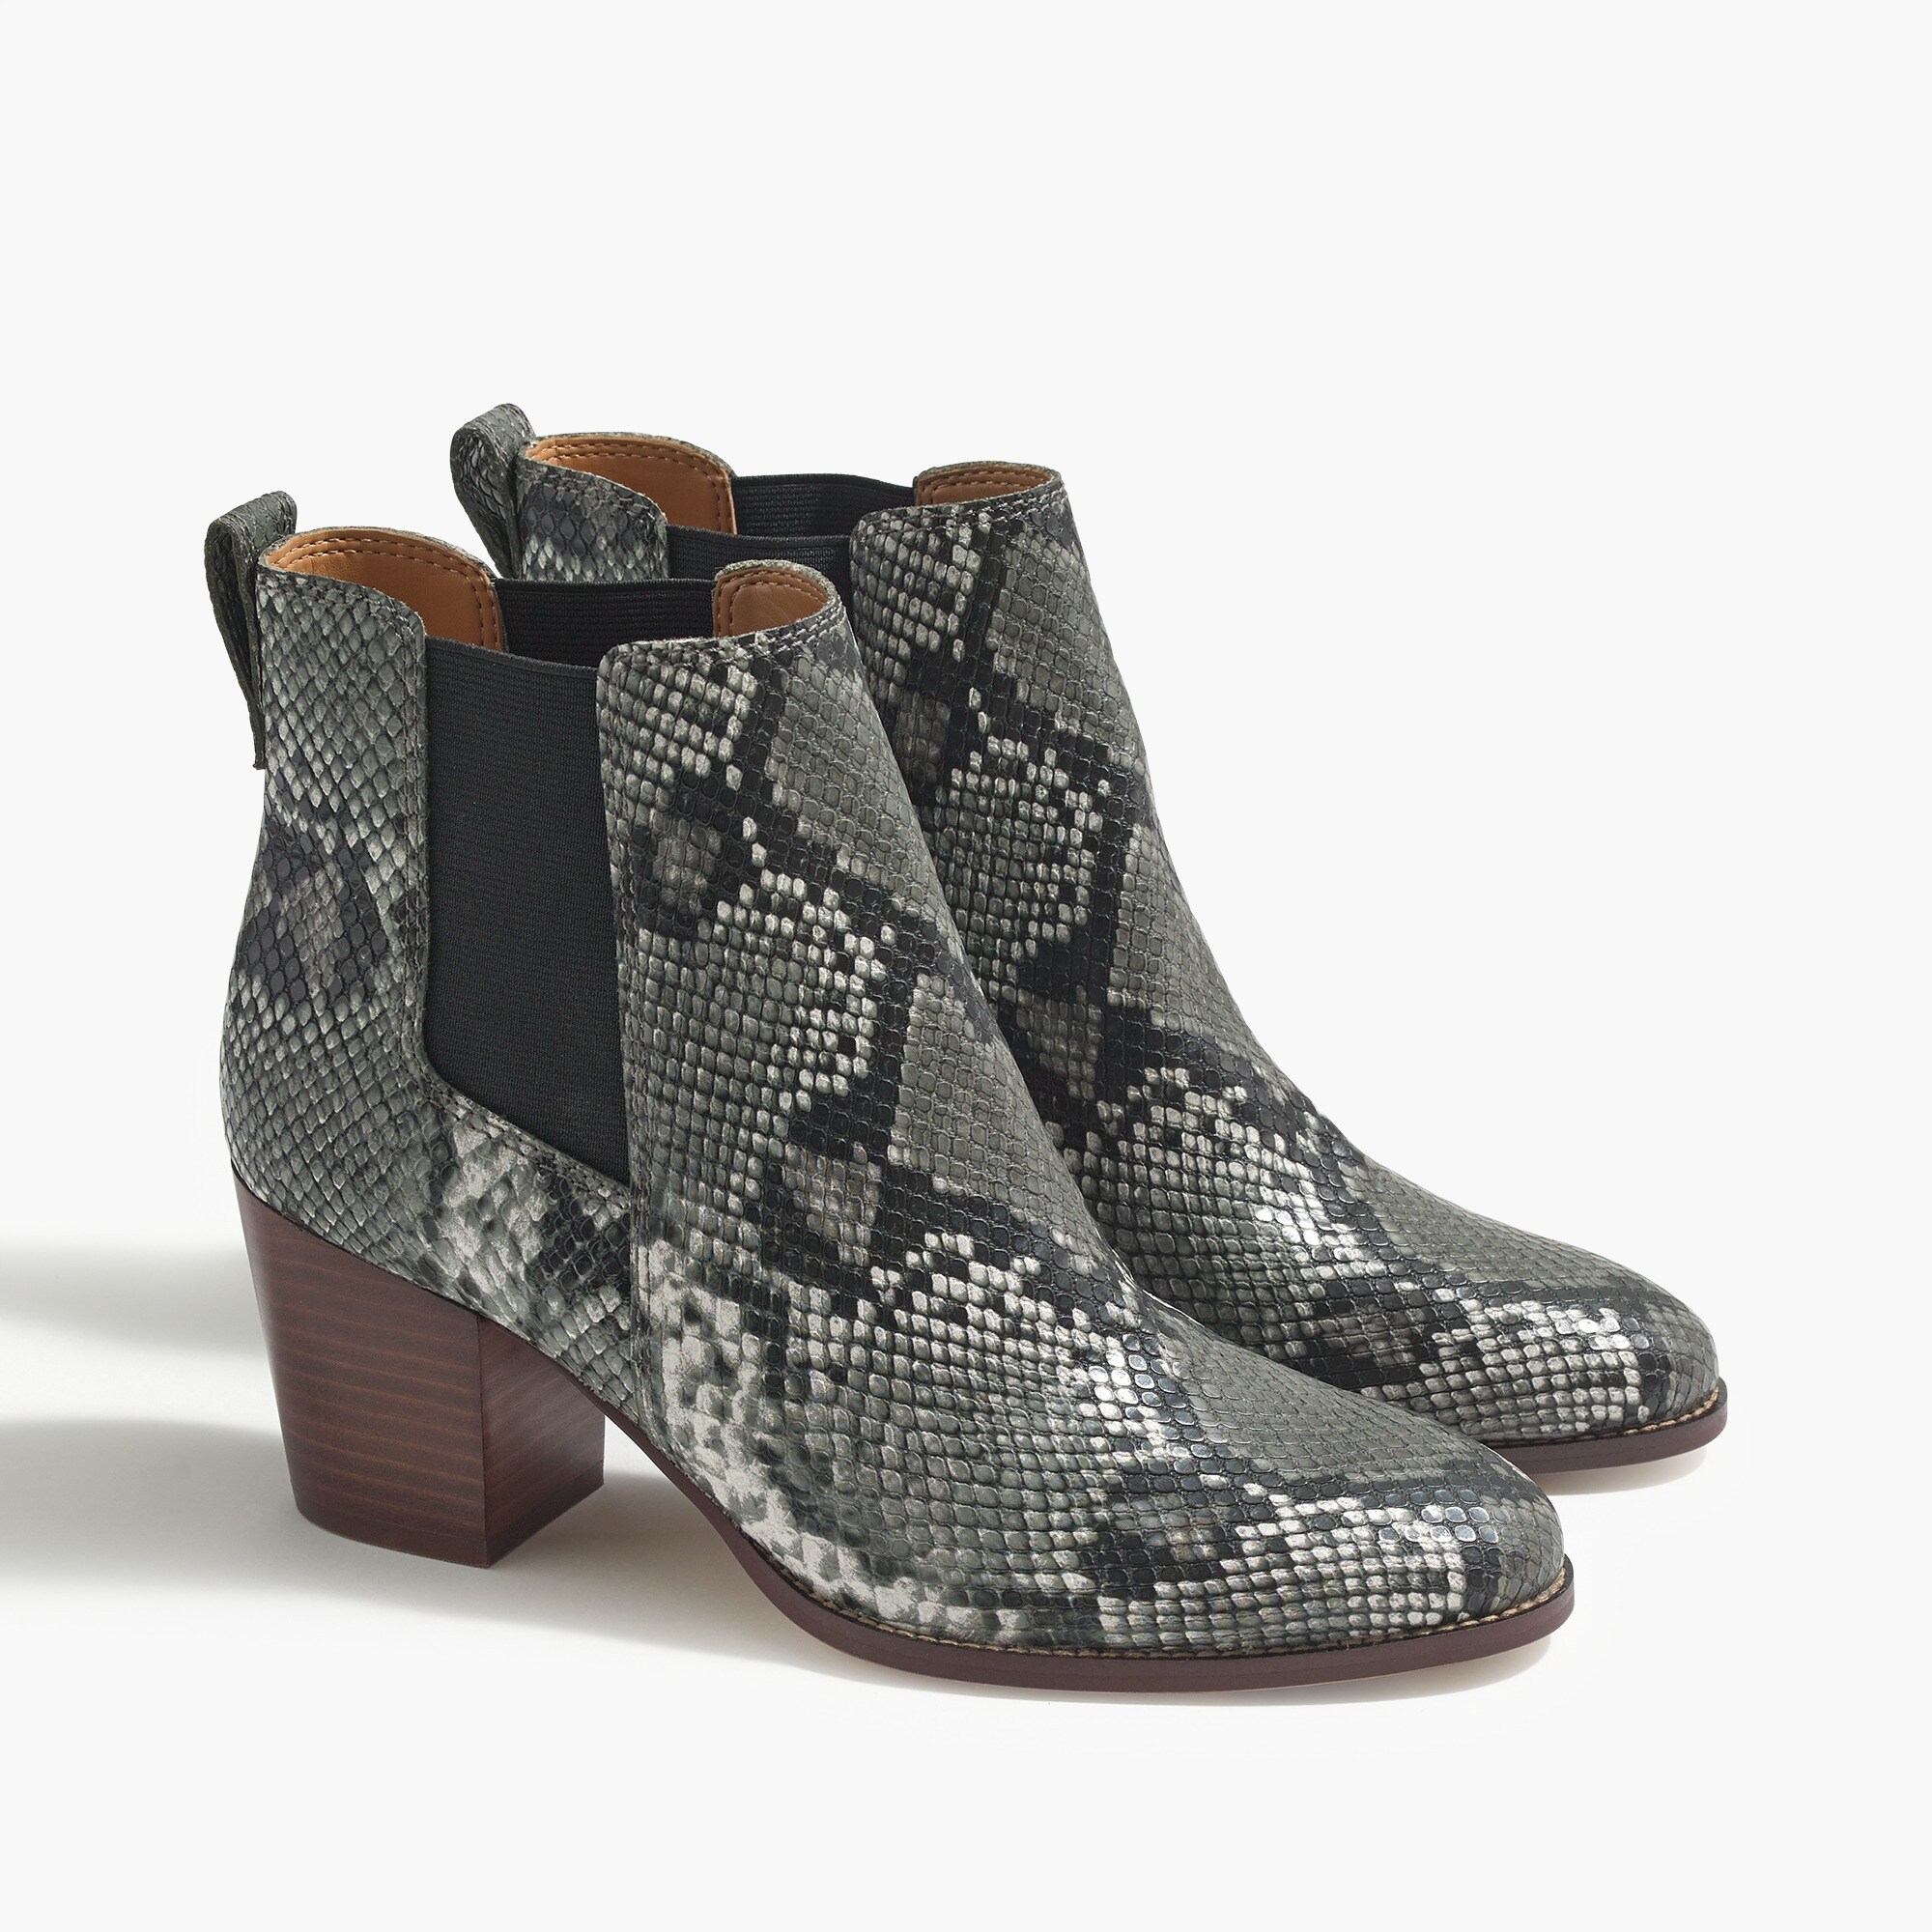 Snakeskin-print Rory Heeled Boots For Women